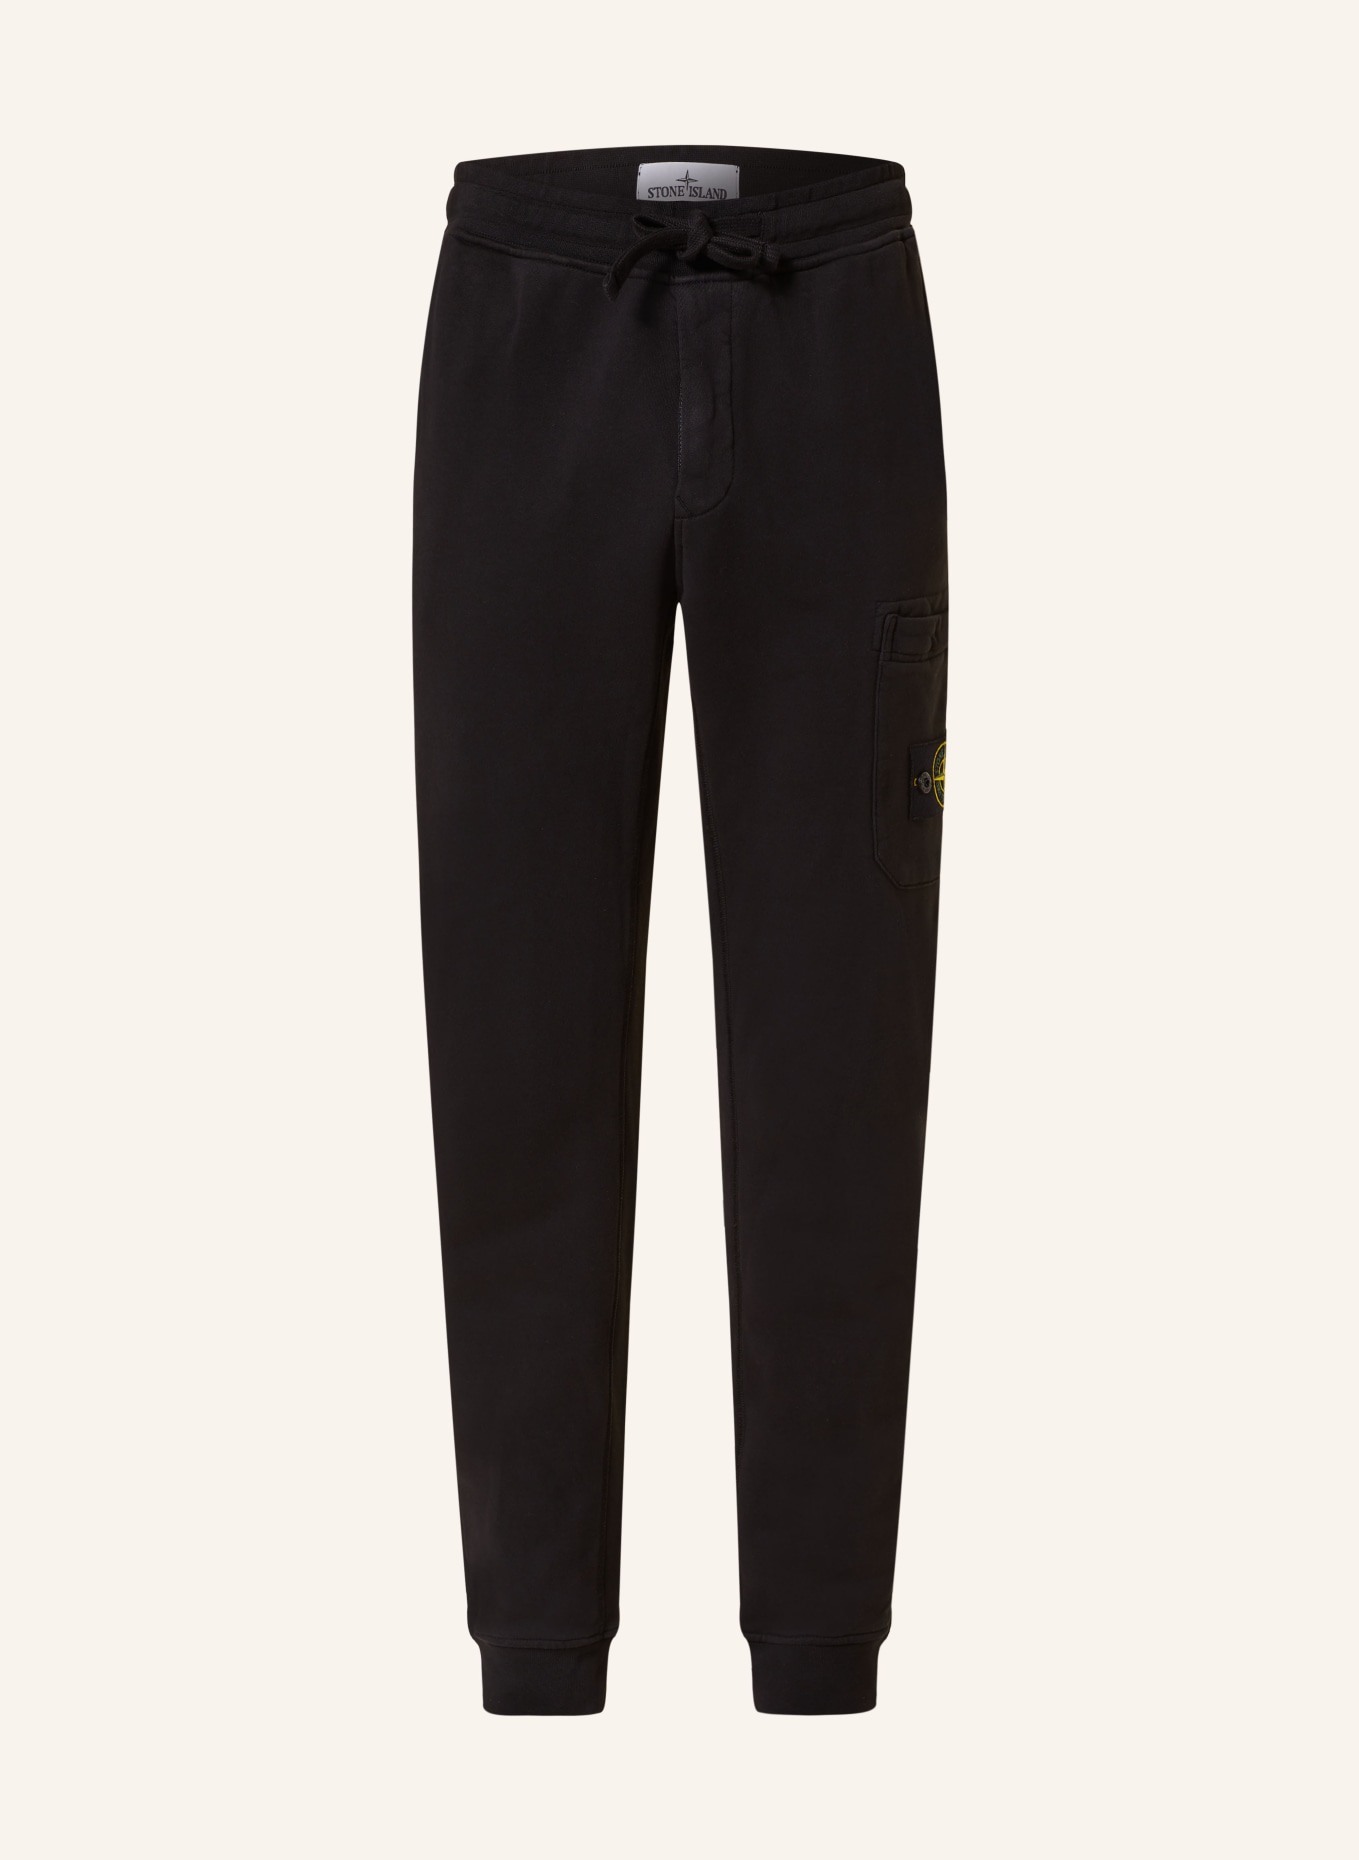 STONE ISLAND Pants in jogger style, Color: BLACK (Image 1)